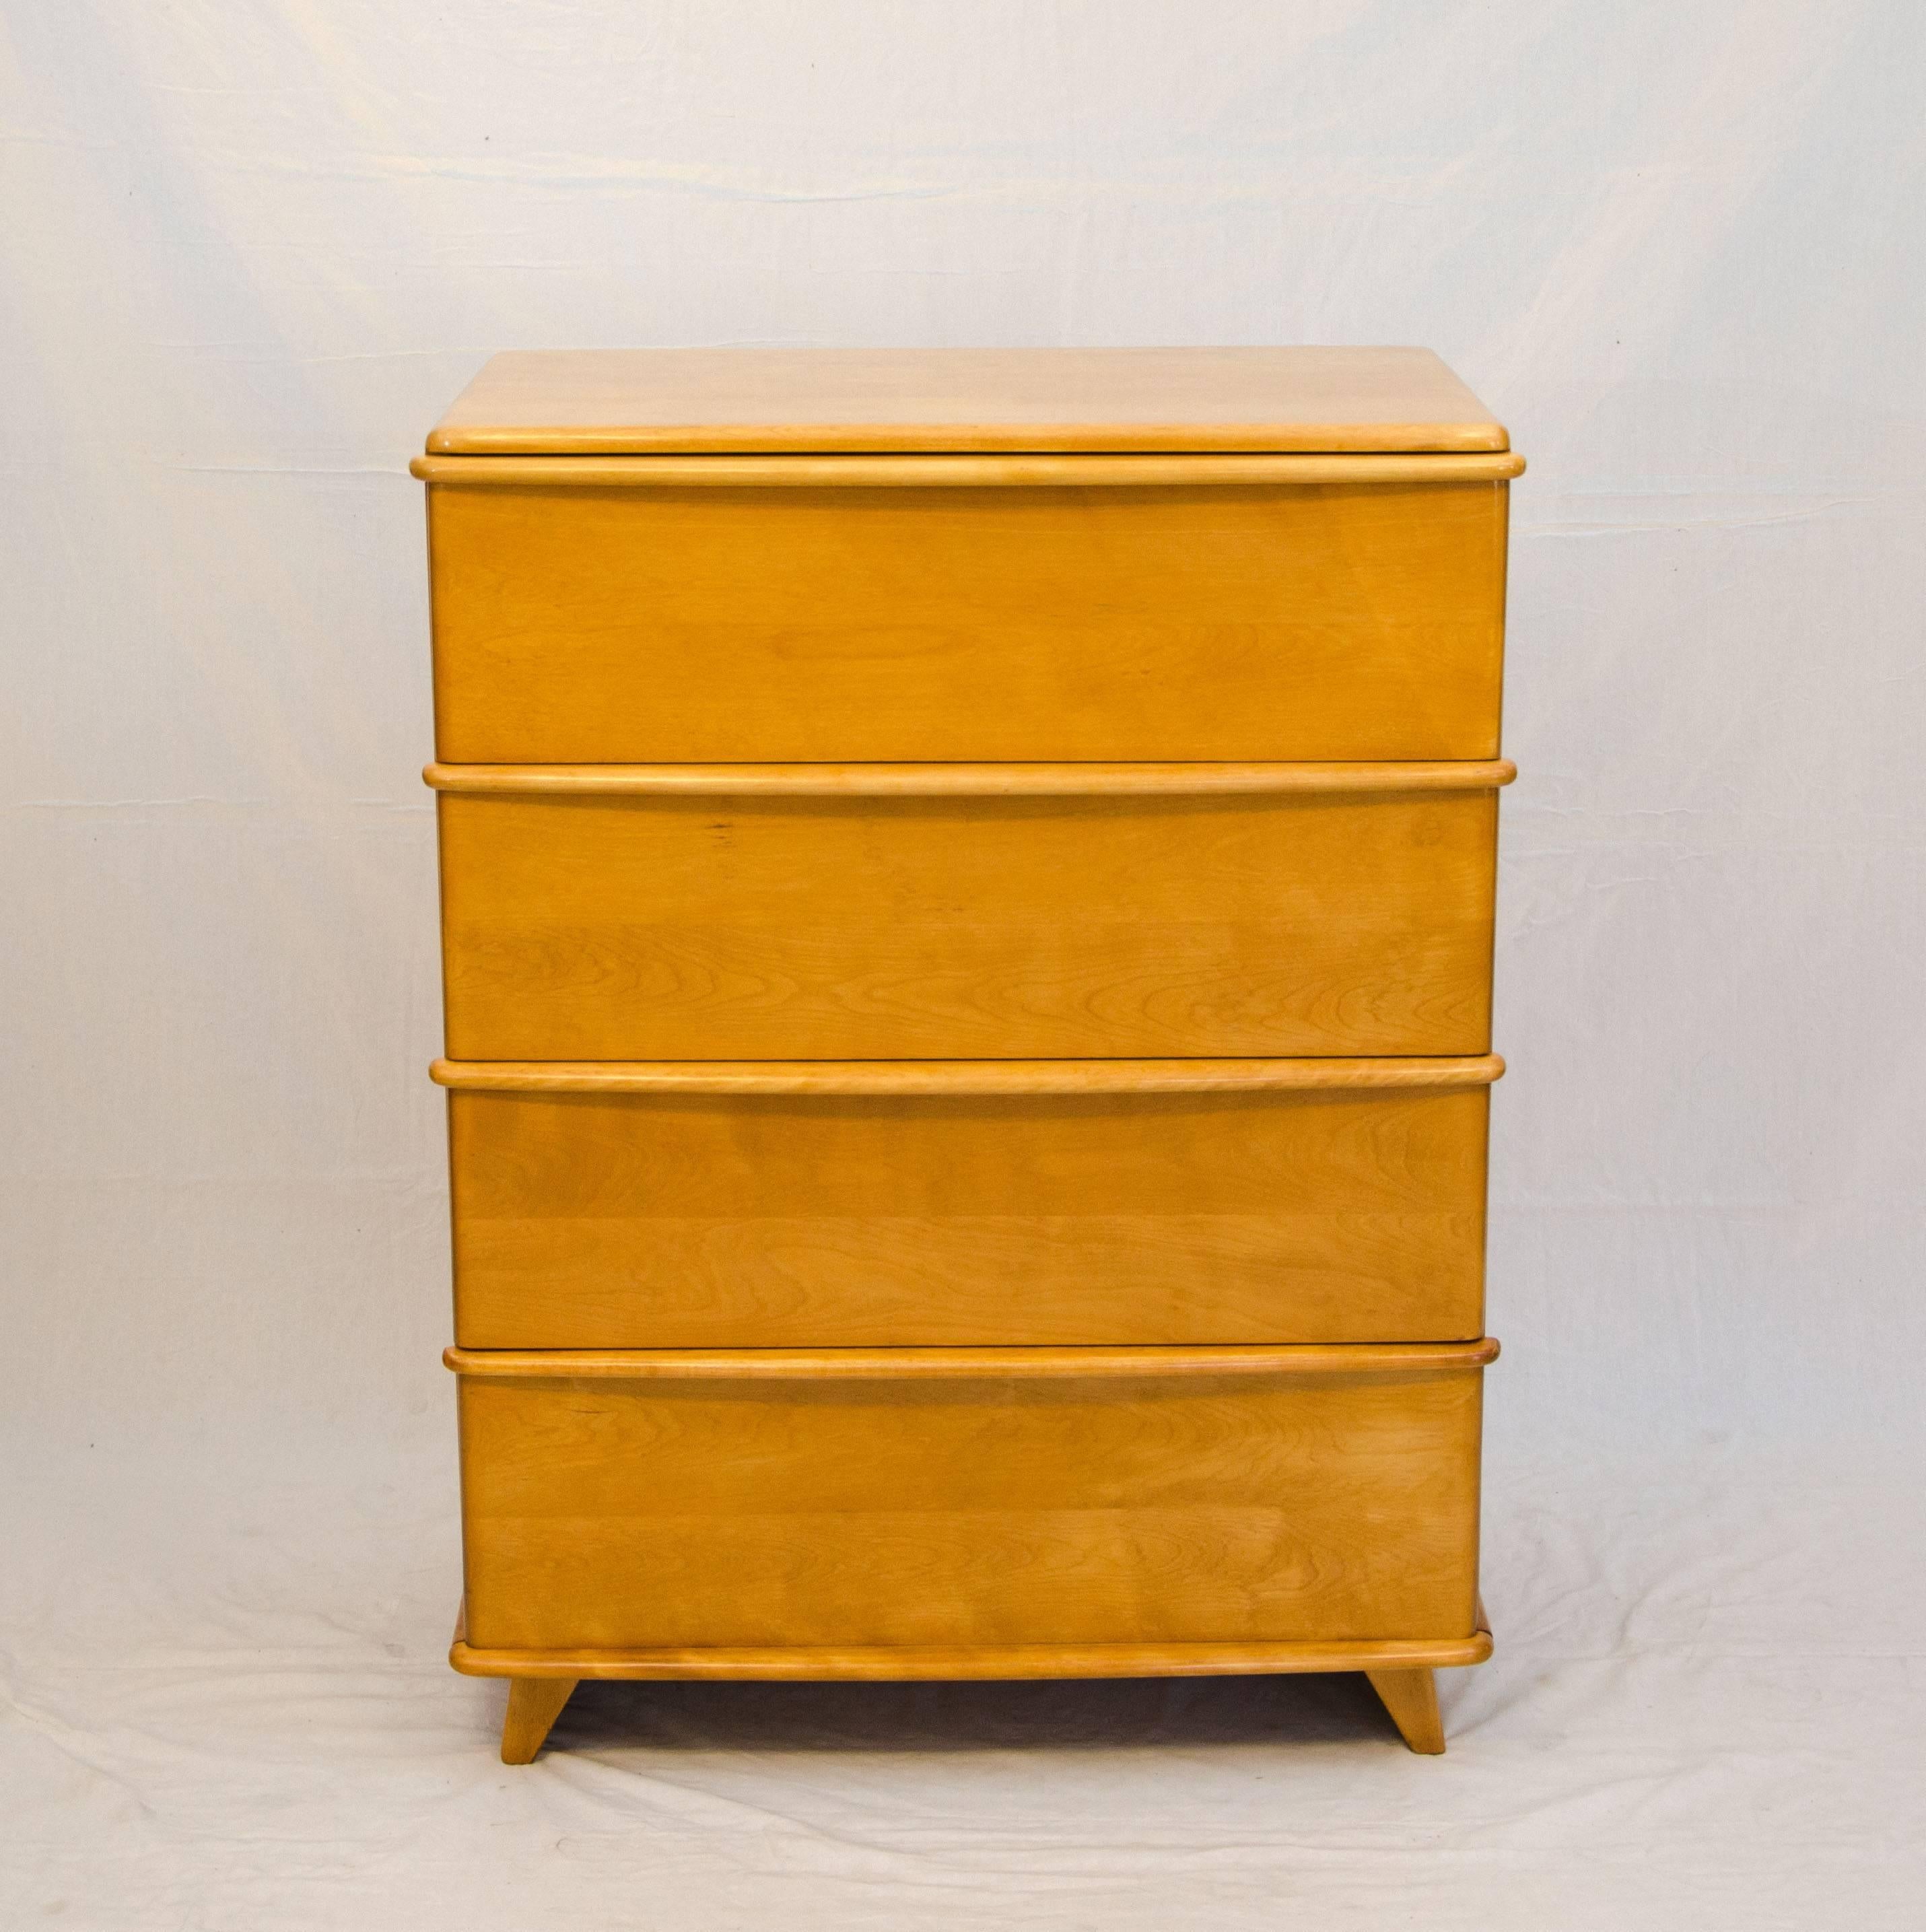 Very nice highboy chest with four deep drawers, each drawer interior is 8" deep. Drawer pulls are attached at the top of each drawer and are tapered from 1" at the ends to 2" at the center. Drawers open easily and smoothly. This chest